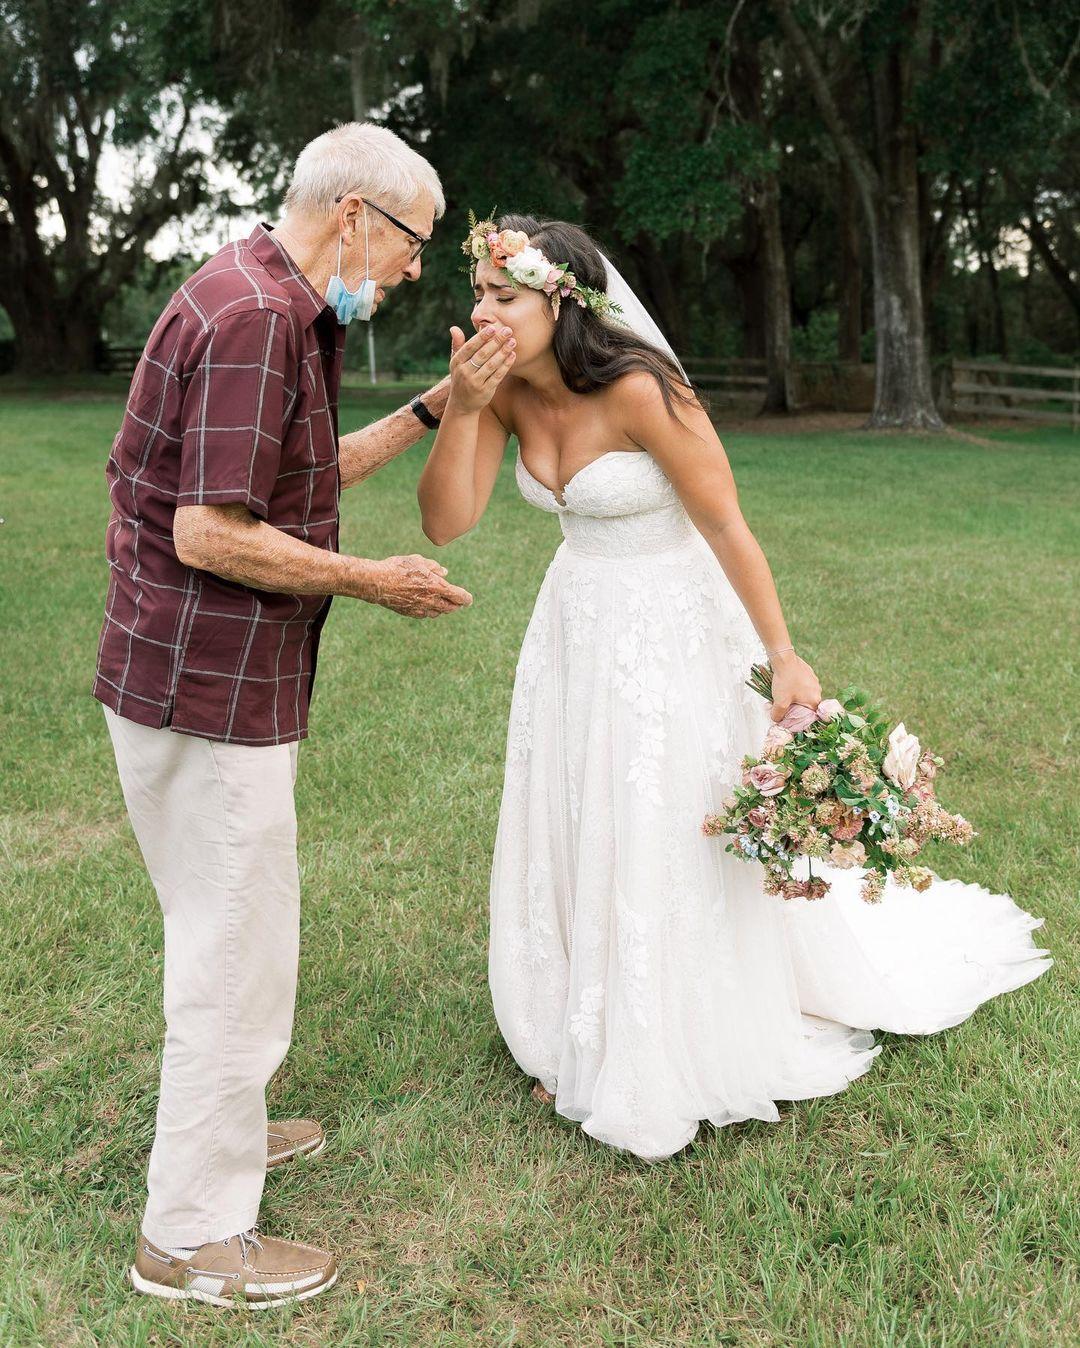 Suzy Dean was overcome with emotion on seeing her grandfather at the wedding. (Courtesy of <a href="https://www.instagram.com/colleensanclemente/">Colleen Sanclemente</a> & <a href="https://www.facebook.com/Tebow.love">Suzy Dean</a>)